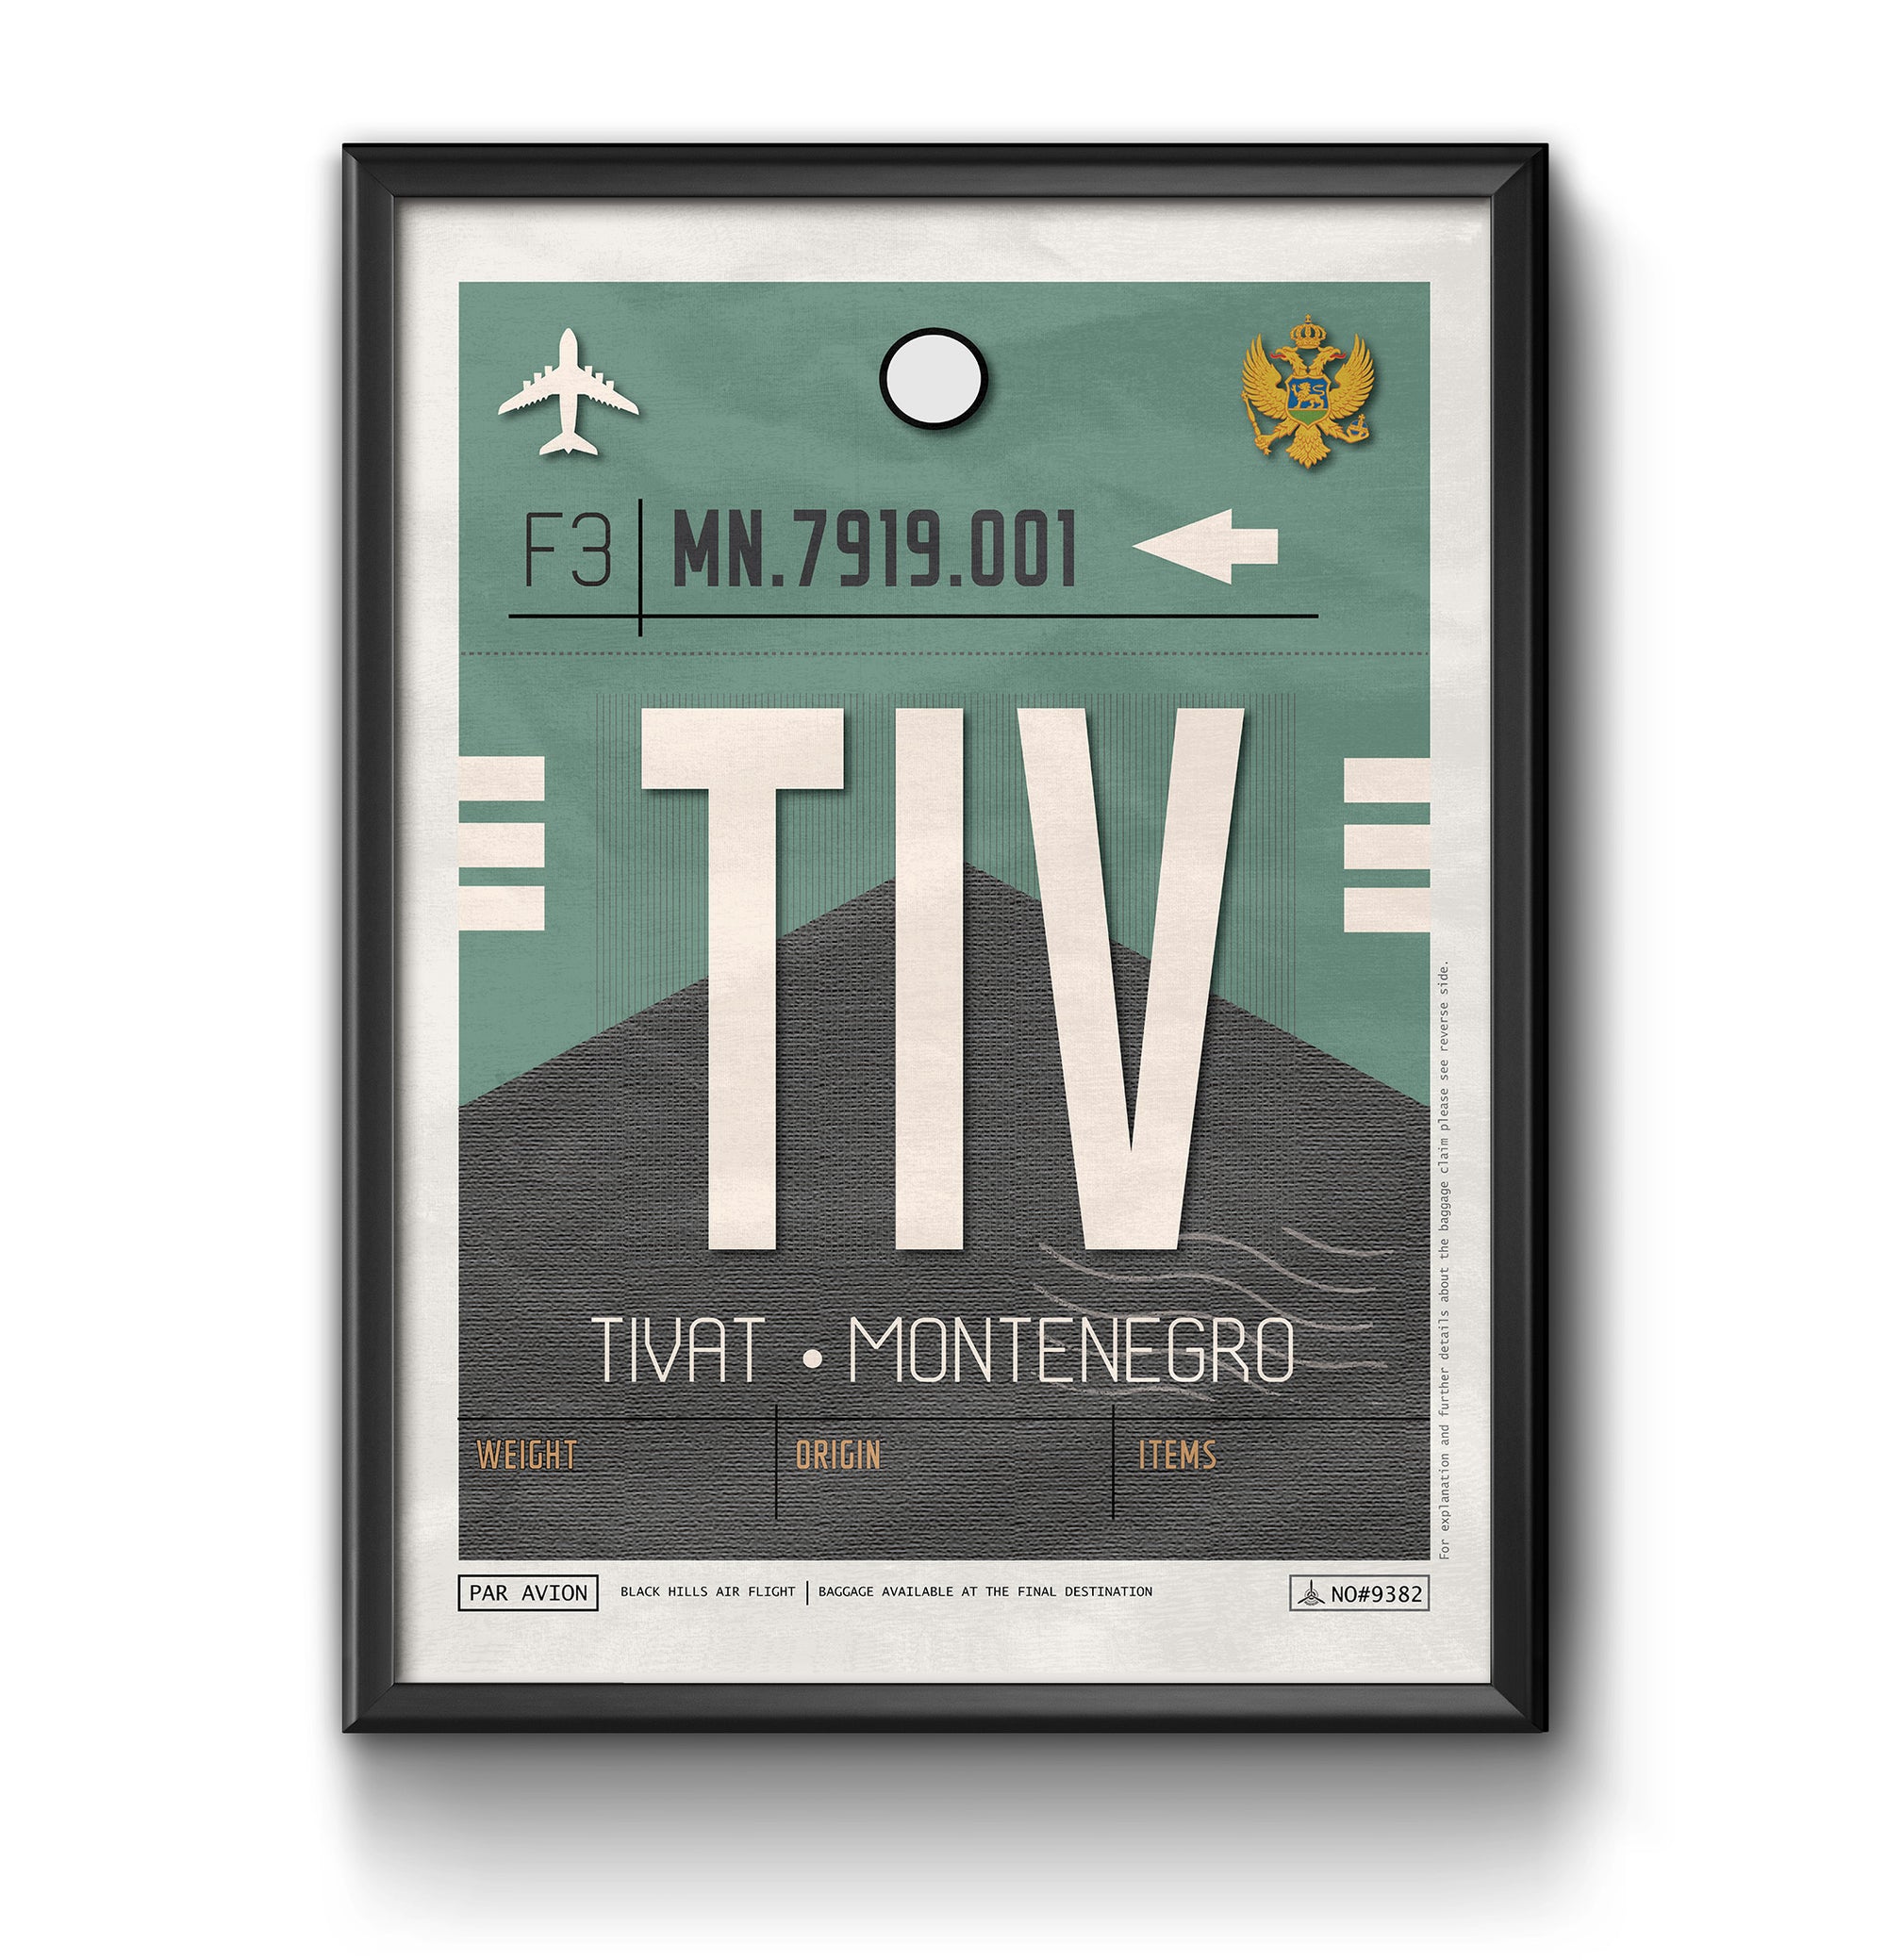 Tivat montenegro TIV airport tag poster luggage tag 